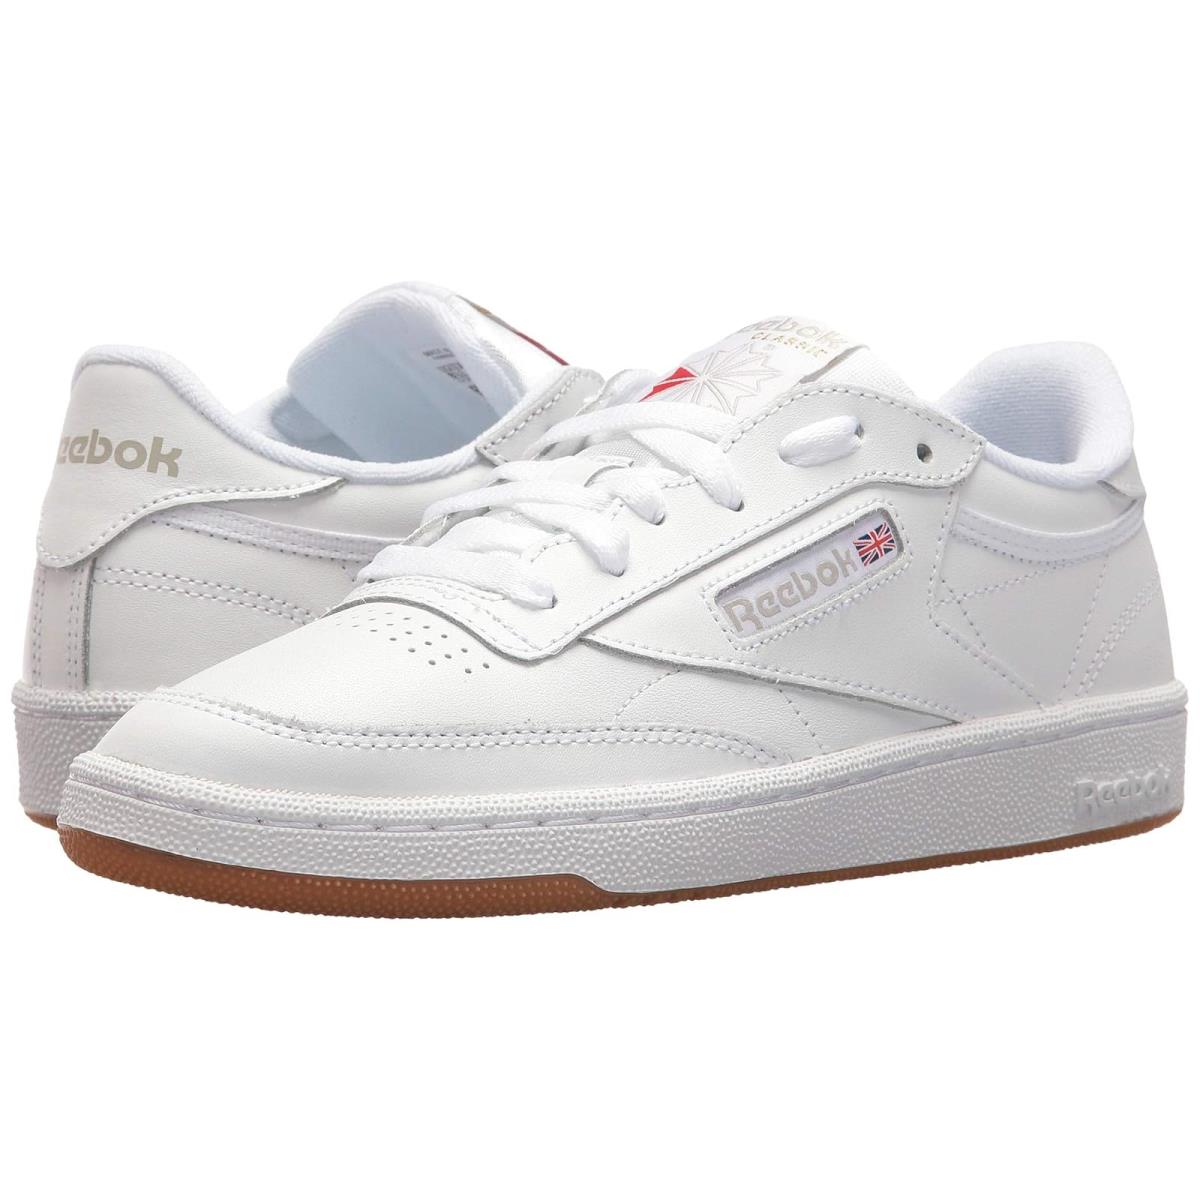 Woman`s Sneakers Athletic Shoes Reebok Lifestyle Club C 85 White/Light Grey/Gum